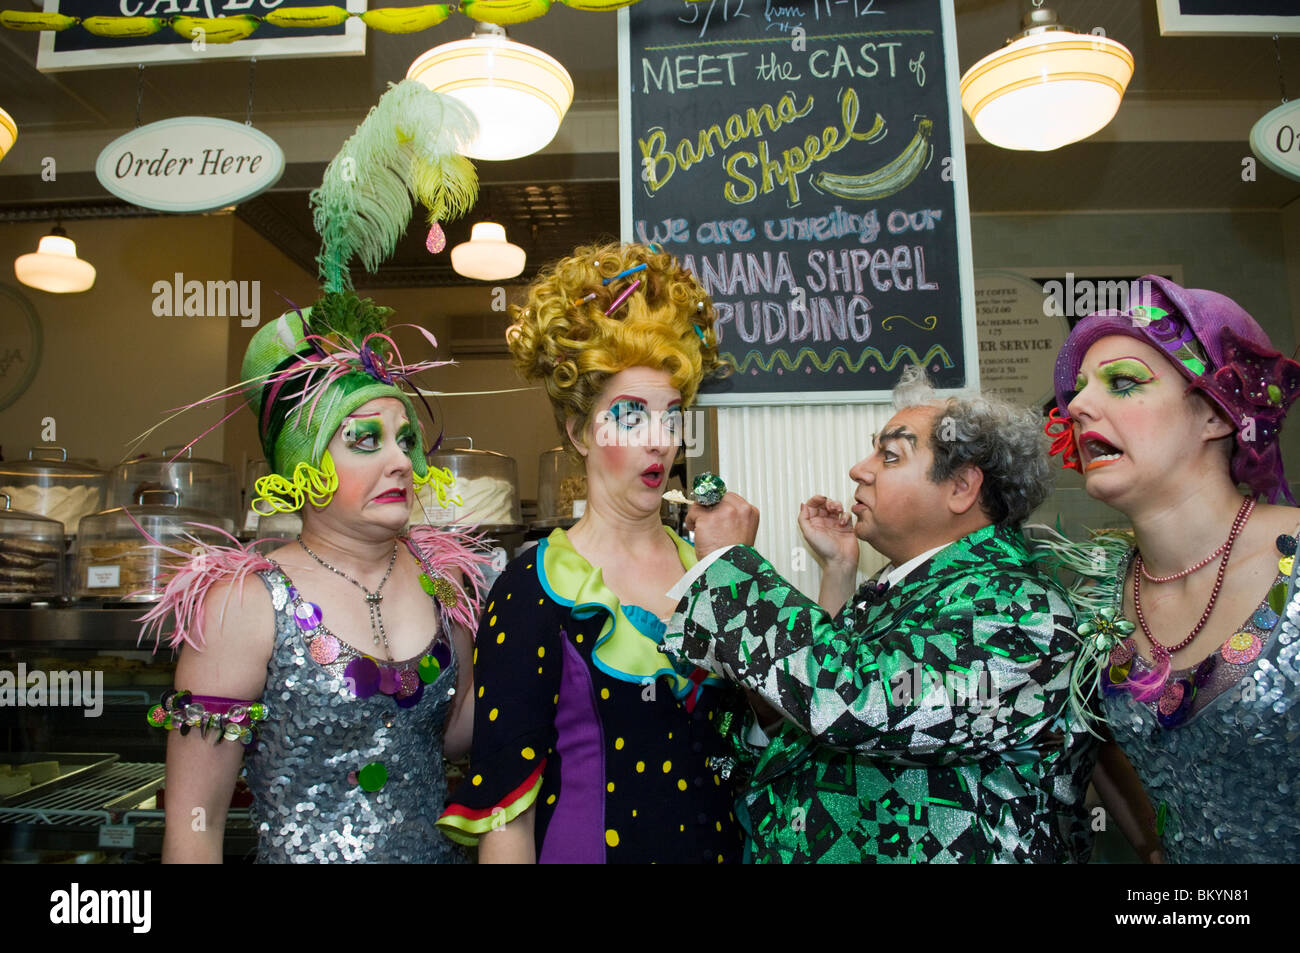 Cirque du Soleil performers promote the Banana Shpeel show at the Magnolia Bakery Stock Photo